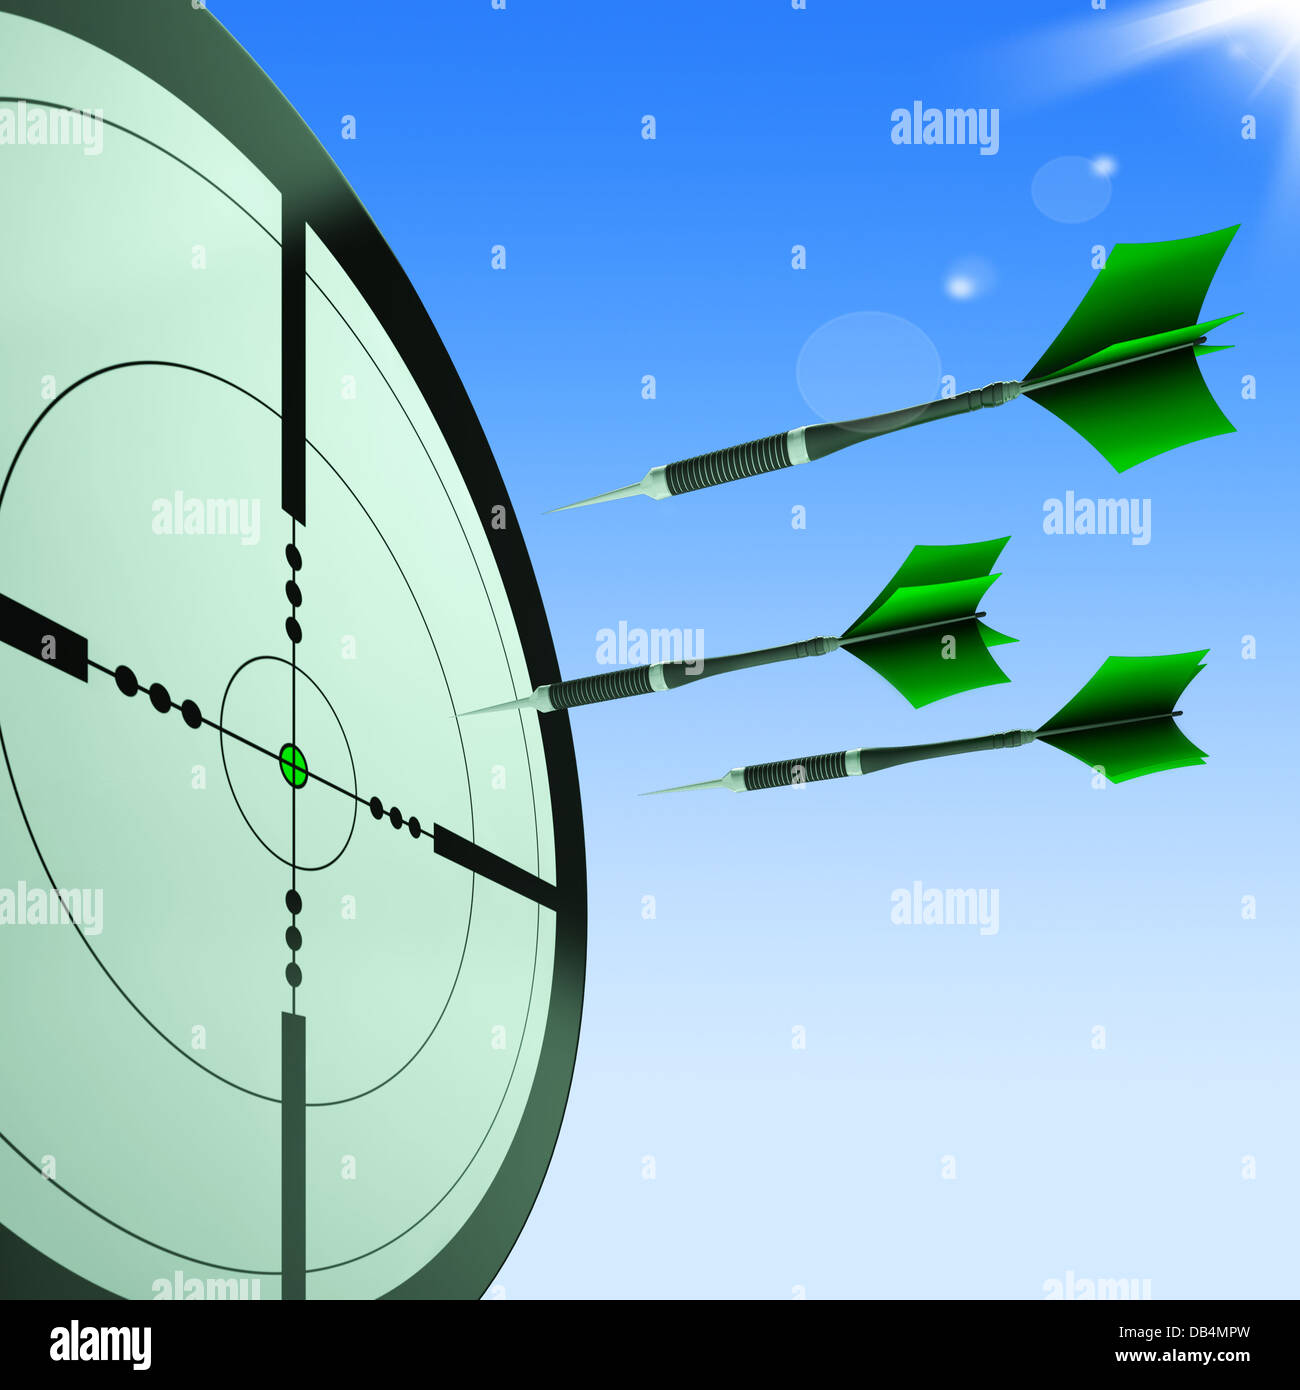 Arrows Aiming Target Shows Hitting Goals Stock Photo